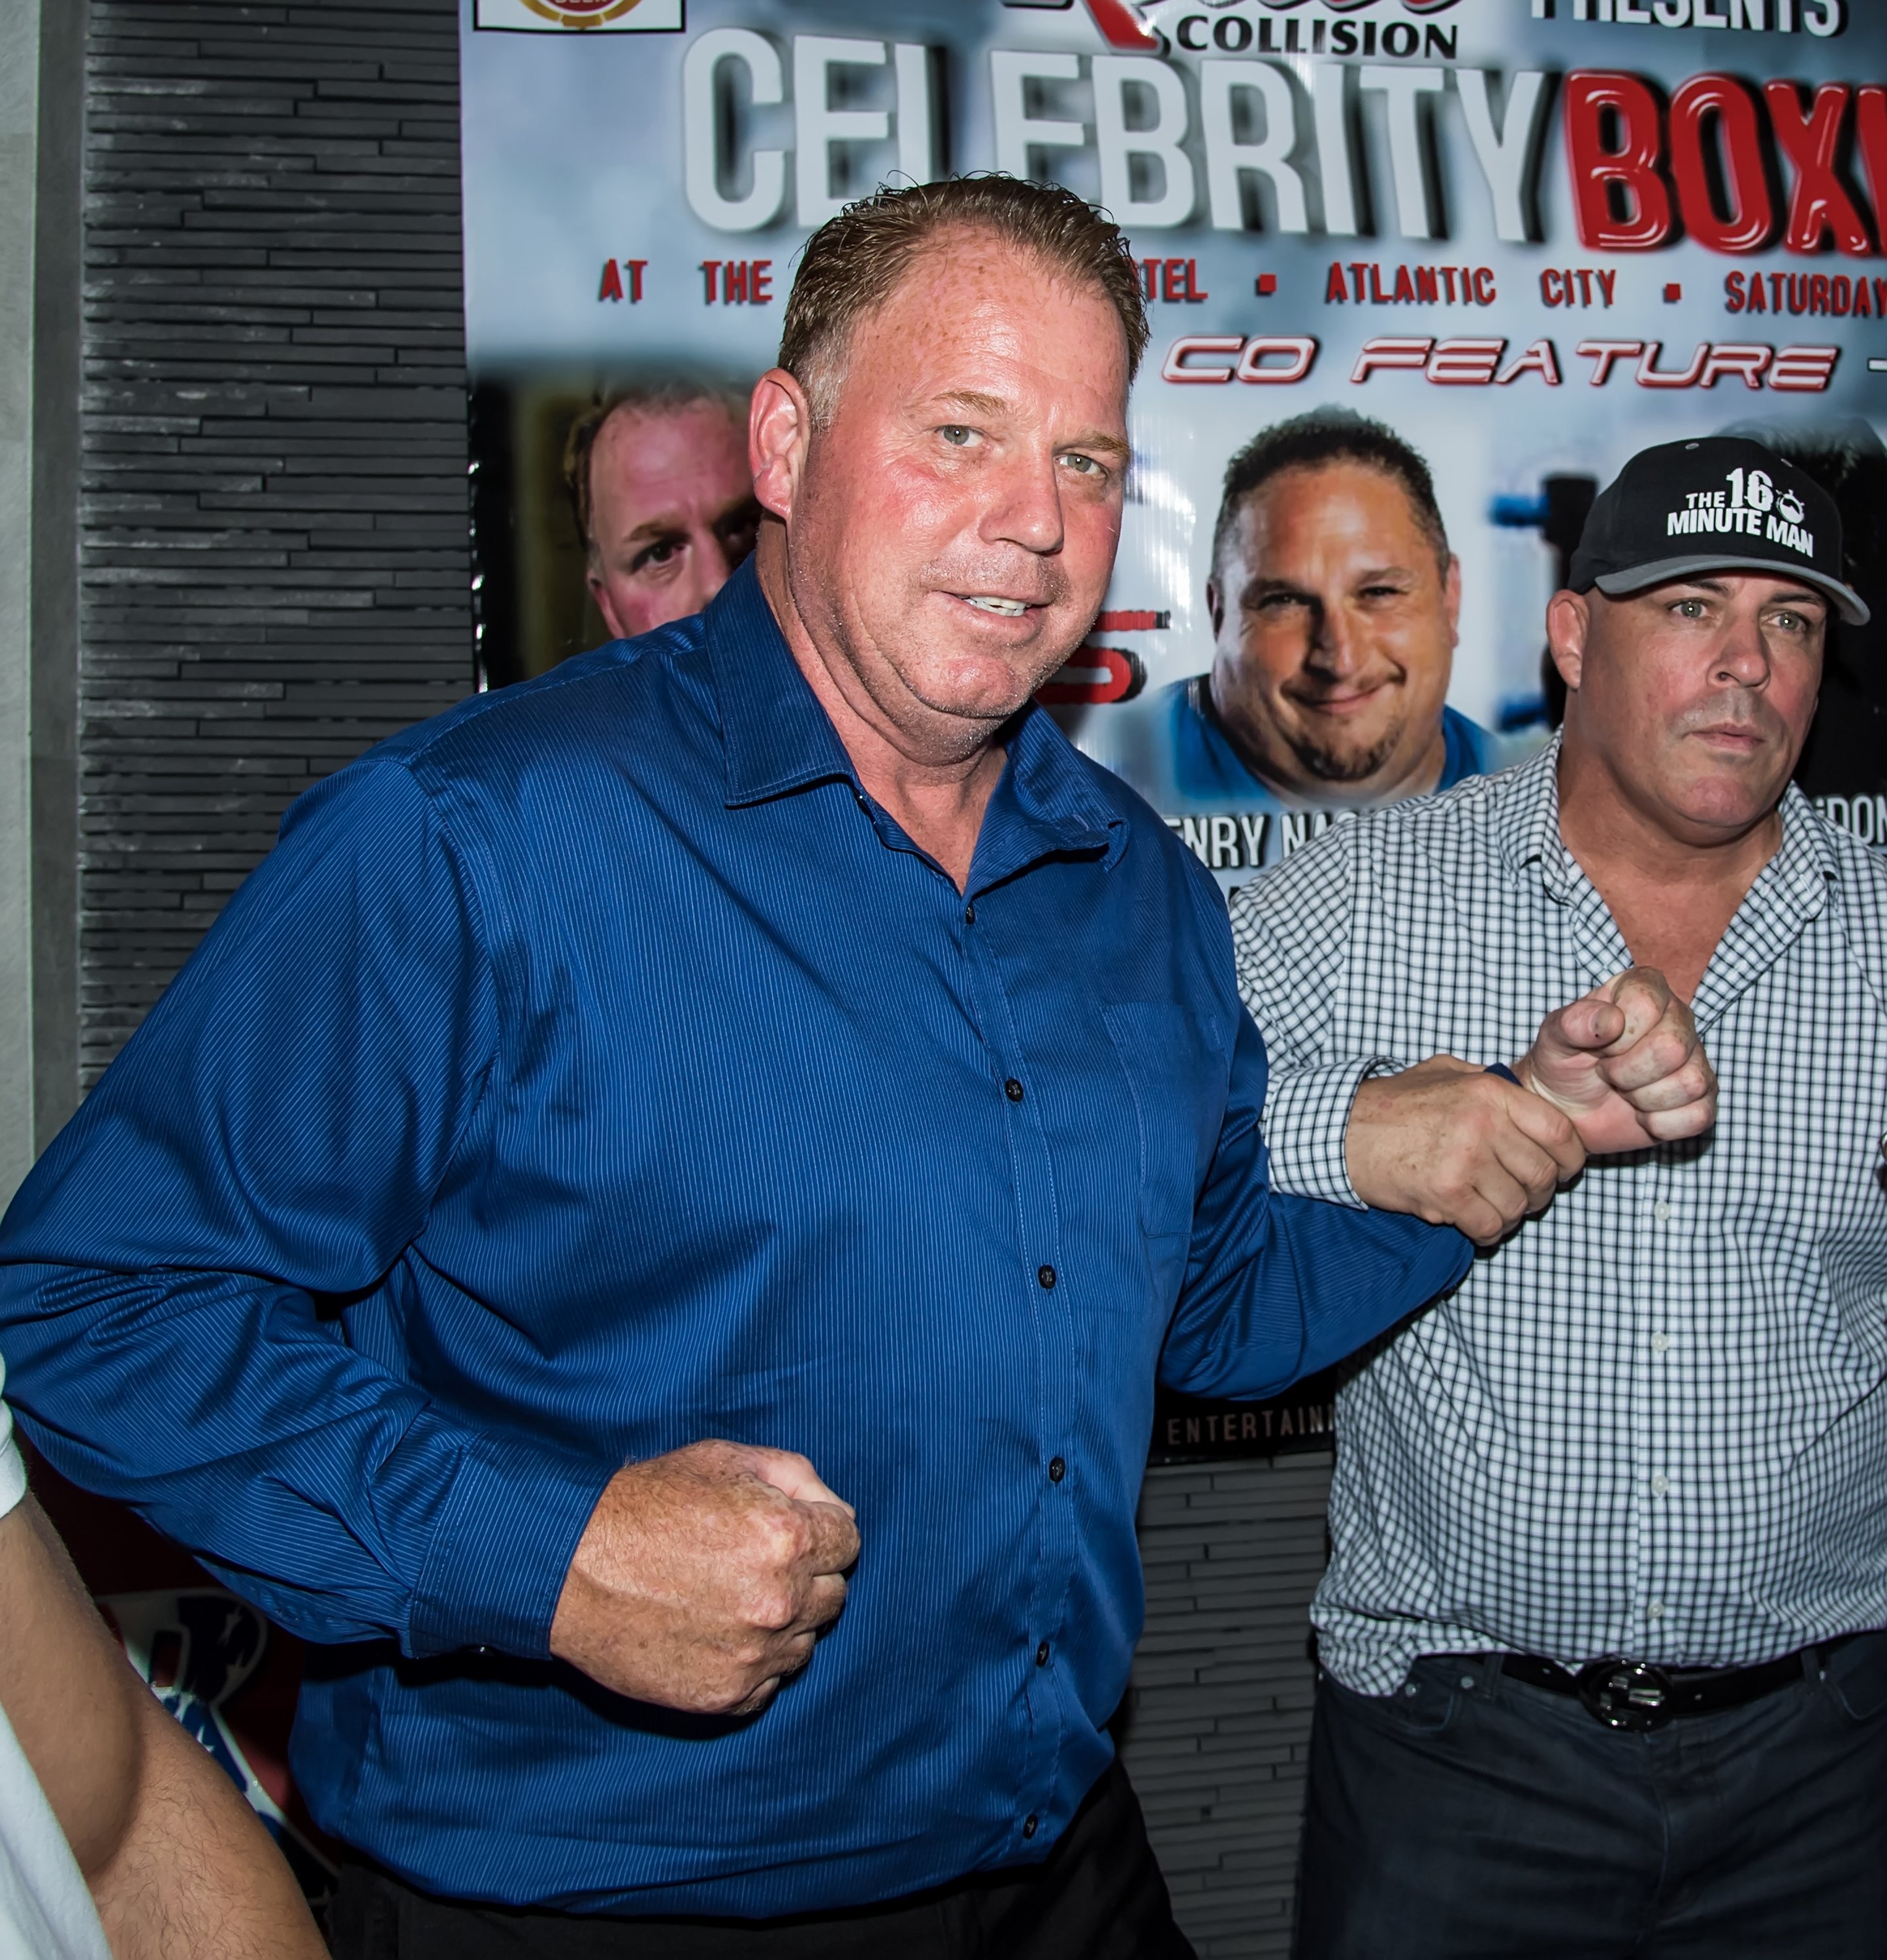 Thomas Markle Jr. and celebrity boxing promoter Damon Feldman at the Rocco's Collision Presents Celebrity Boxing 68 on May 15, 2019, in Philadelphia, Pennsylvania. | Source: Getty Images